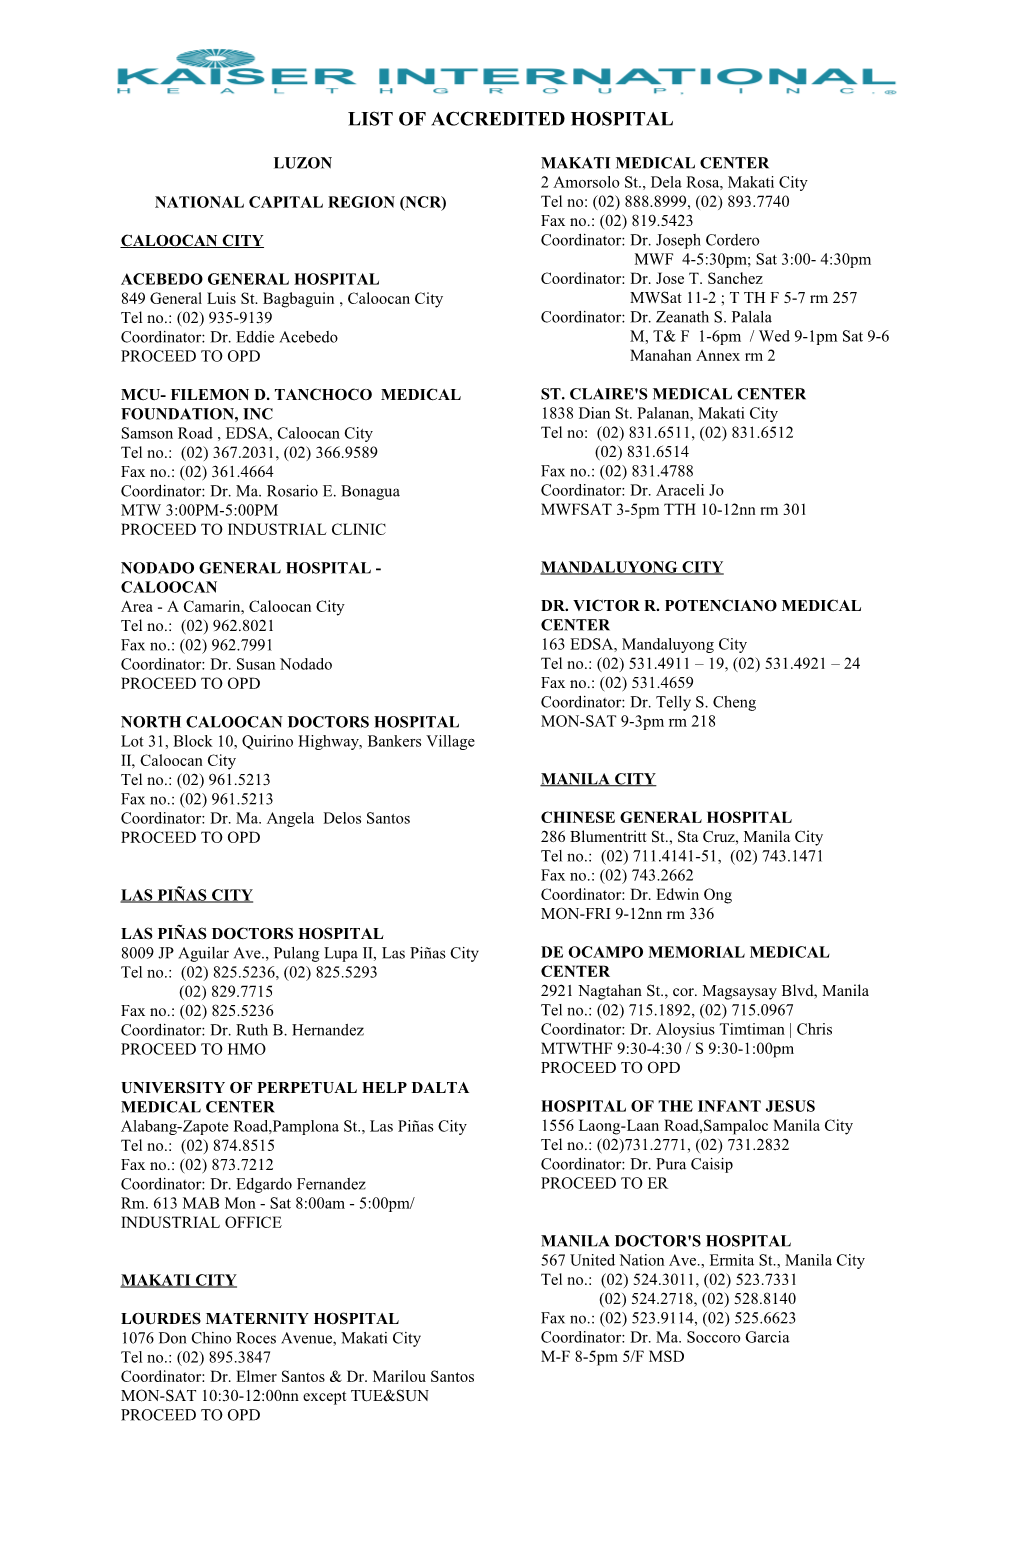 List of Accredited Hospital